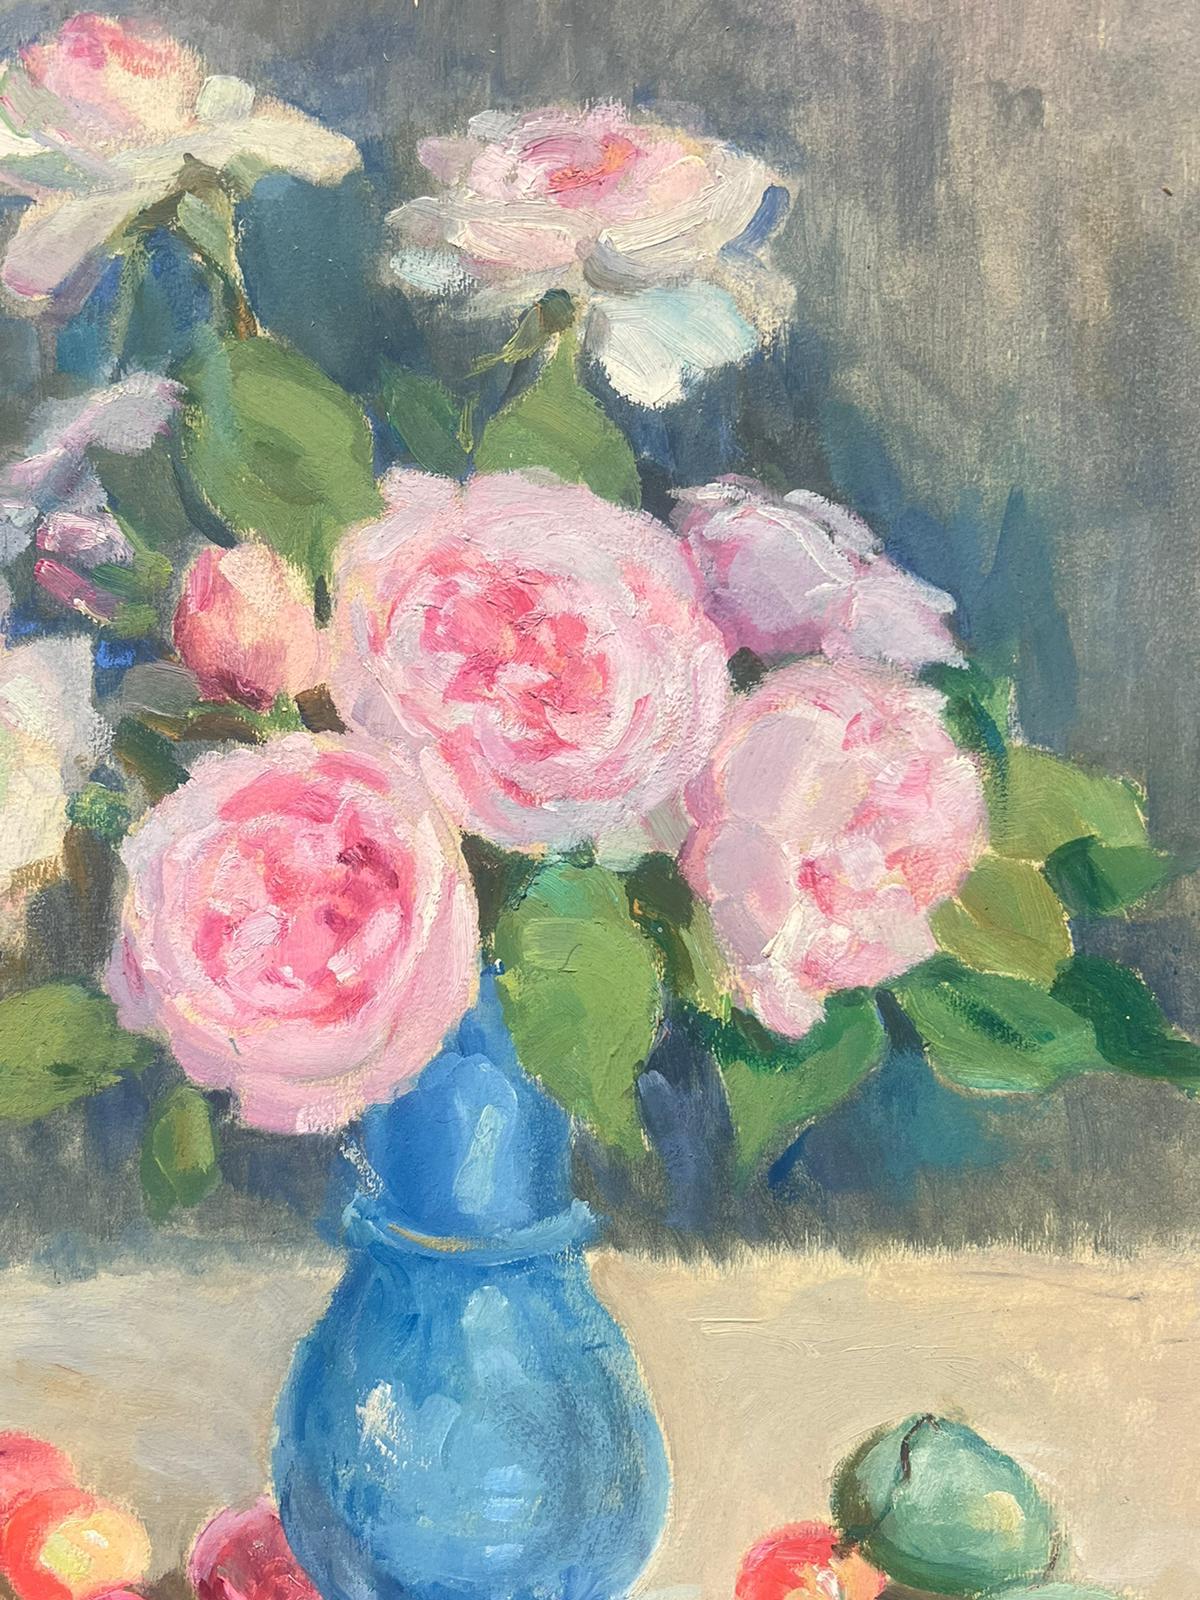 Pink Roses
by Louise Alix (French, 1888-1980) *see notes below
provenance stamp to the back 
signed by oil painting on board, unframed
measures: 16.5 high by 13.5 inches wide
condition: overall very good and sound, a few scuffs and marks to the